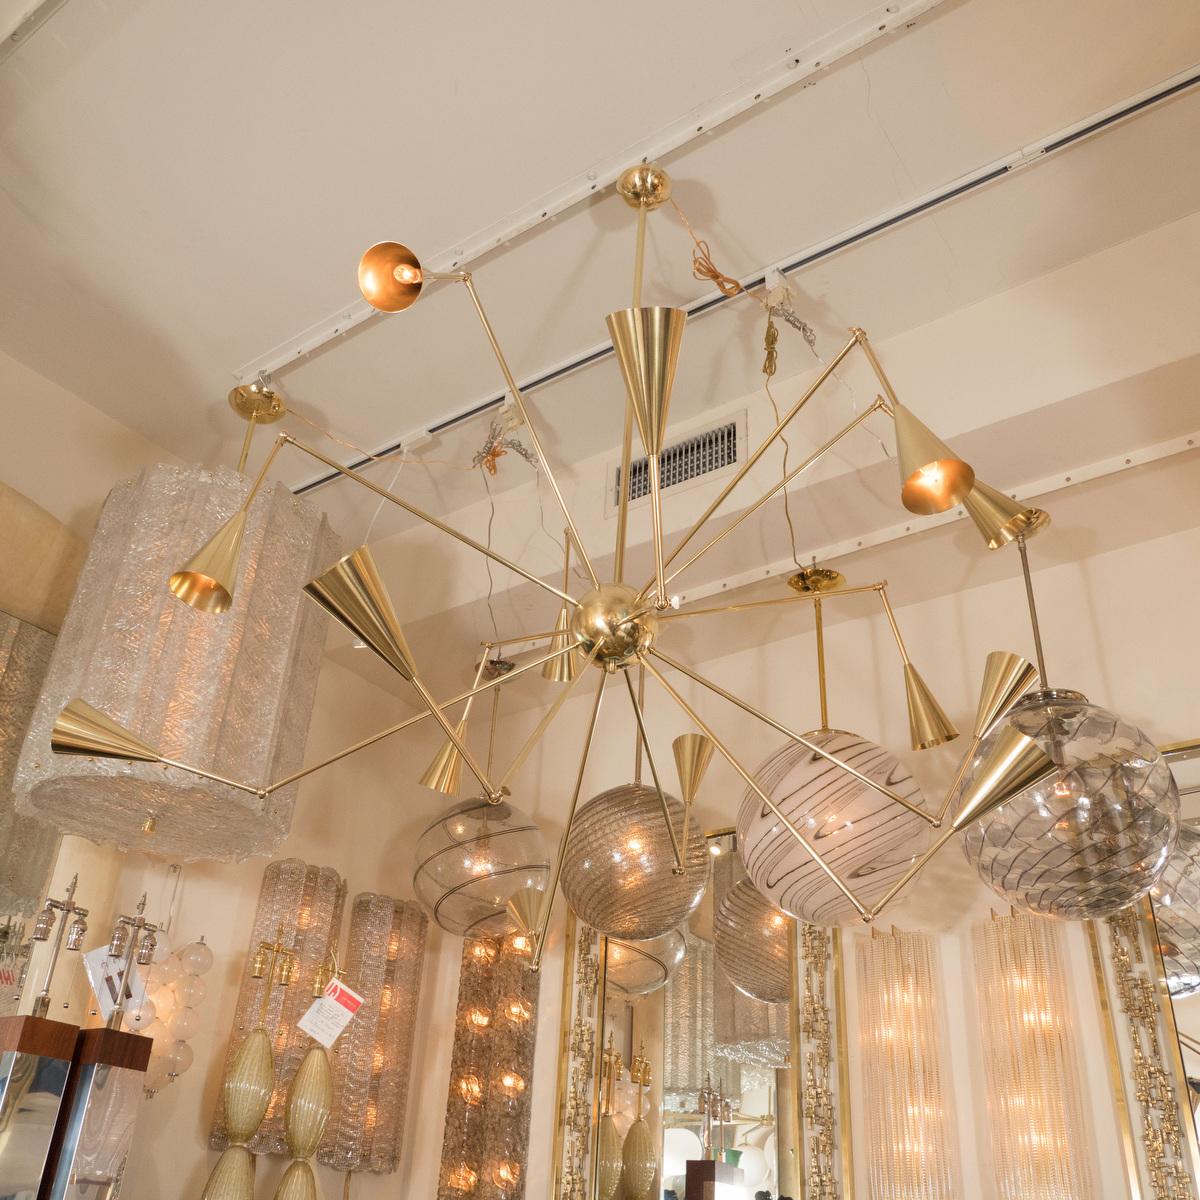 Adjustable arm brass chandelier with fourteen conical shades. Measured as shown.